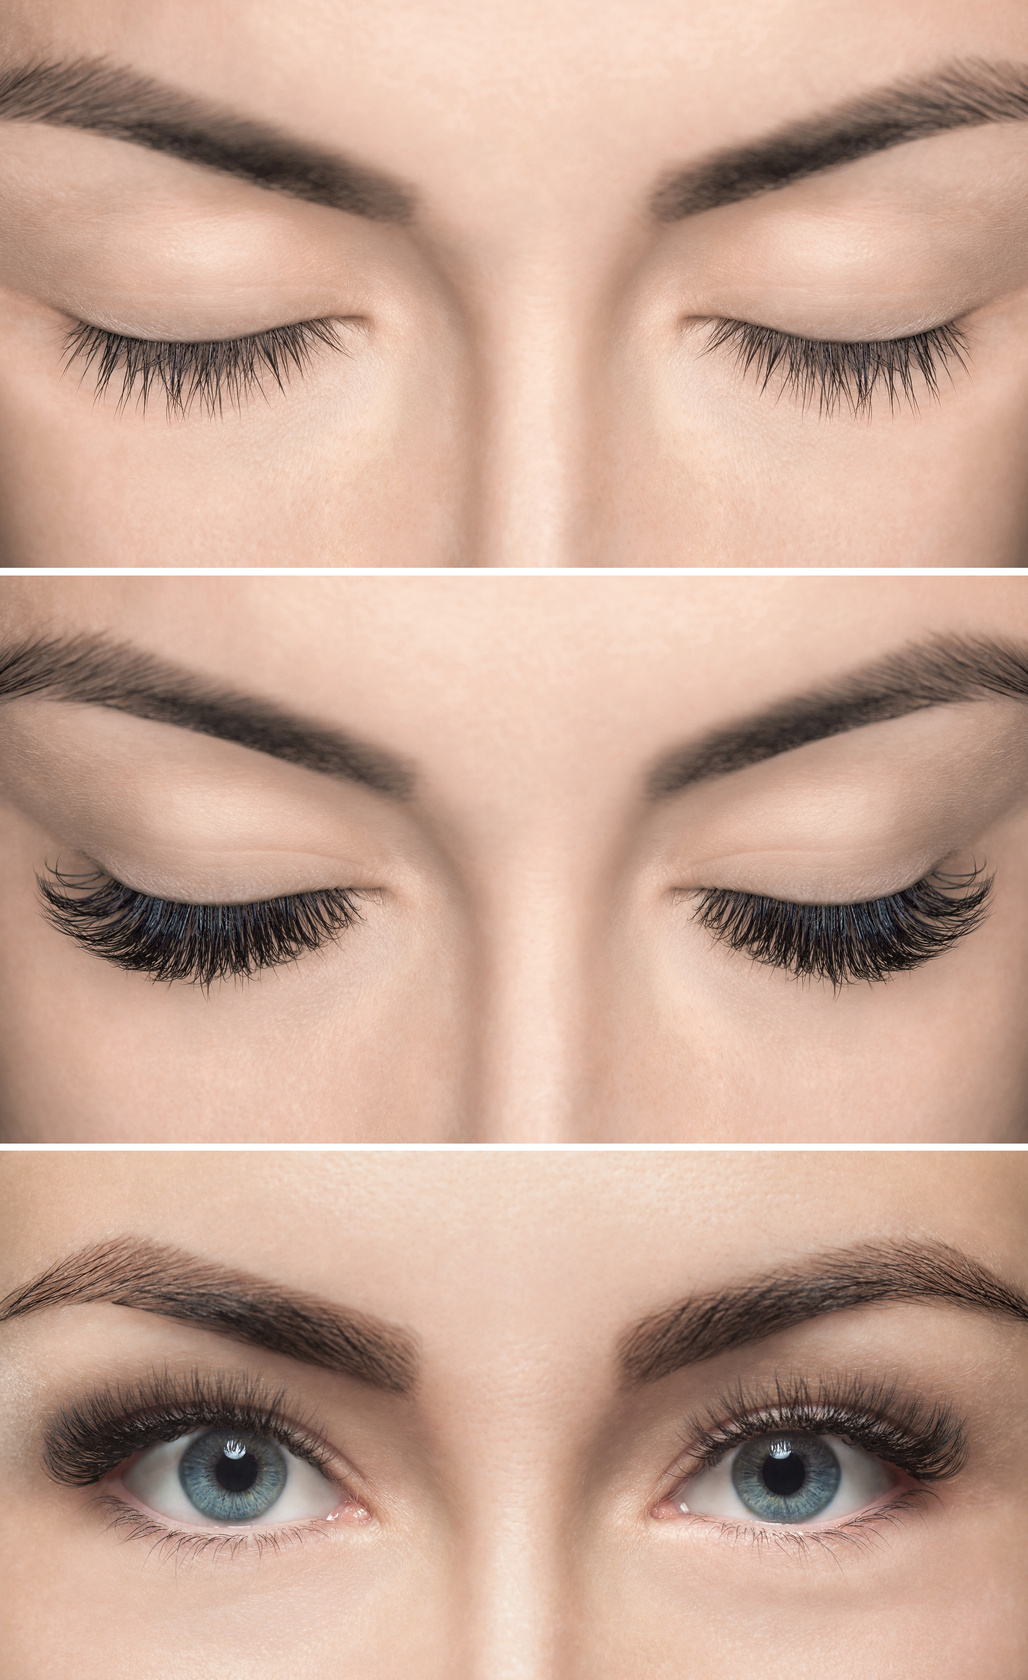 Eyelash removal procedure before and after close up.